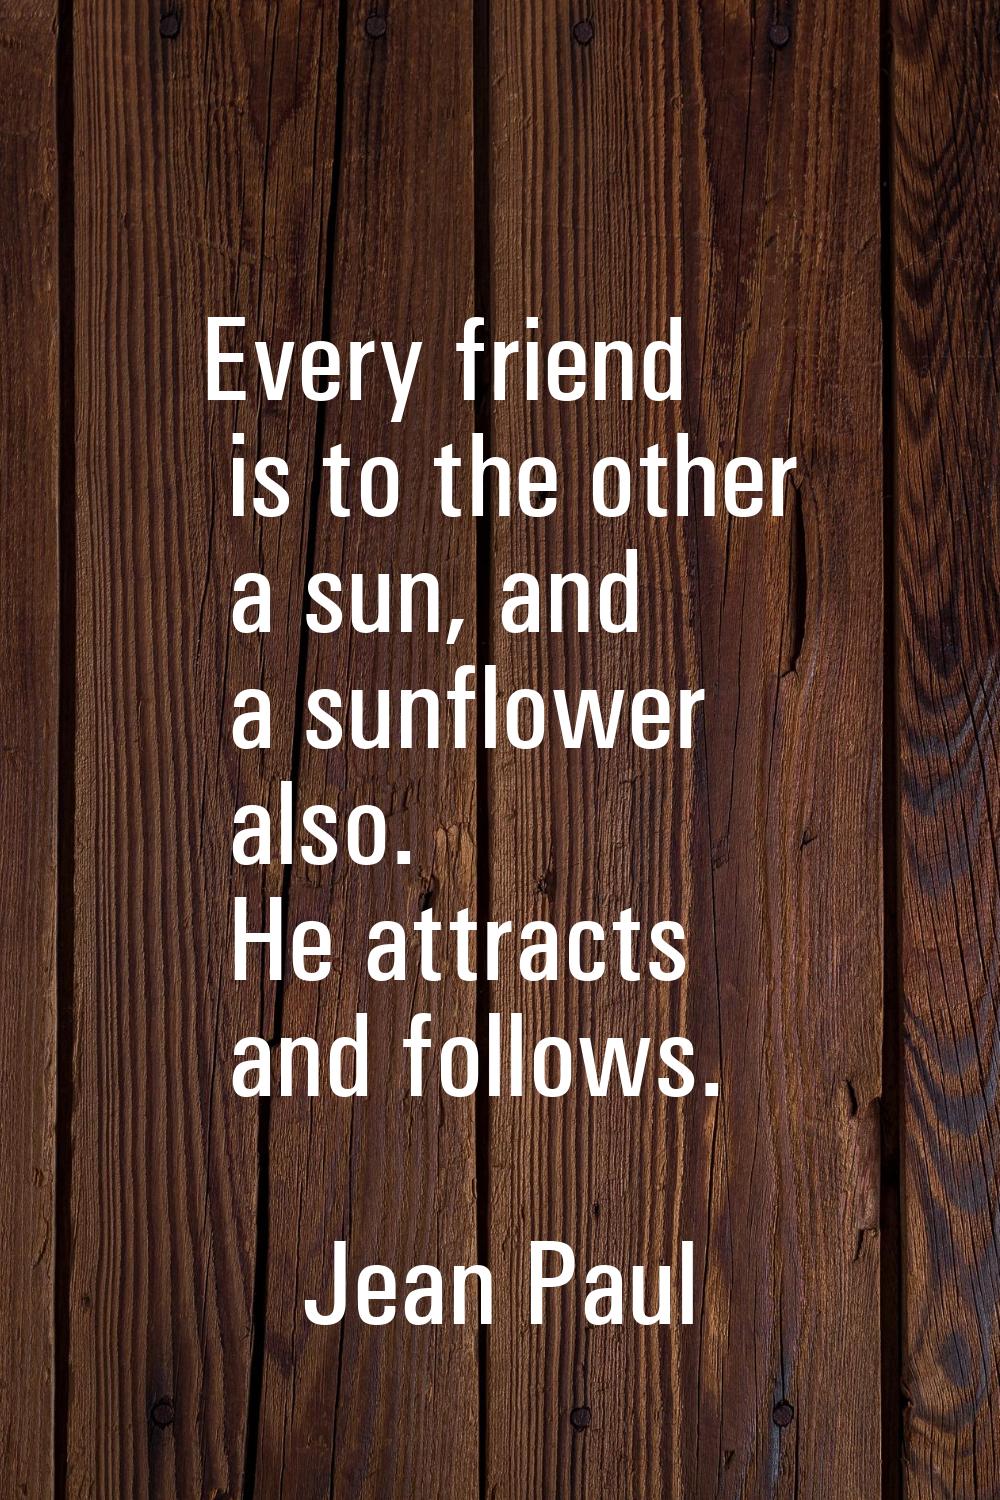 Every friend is to the other a sun, and a sunflower also. He attracts and follows.